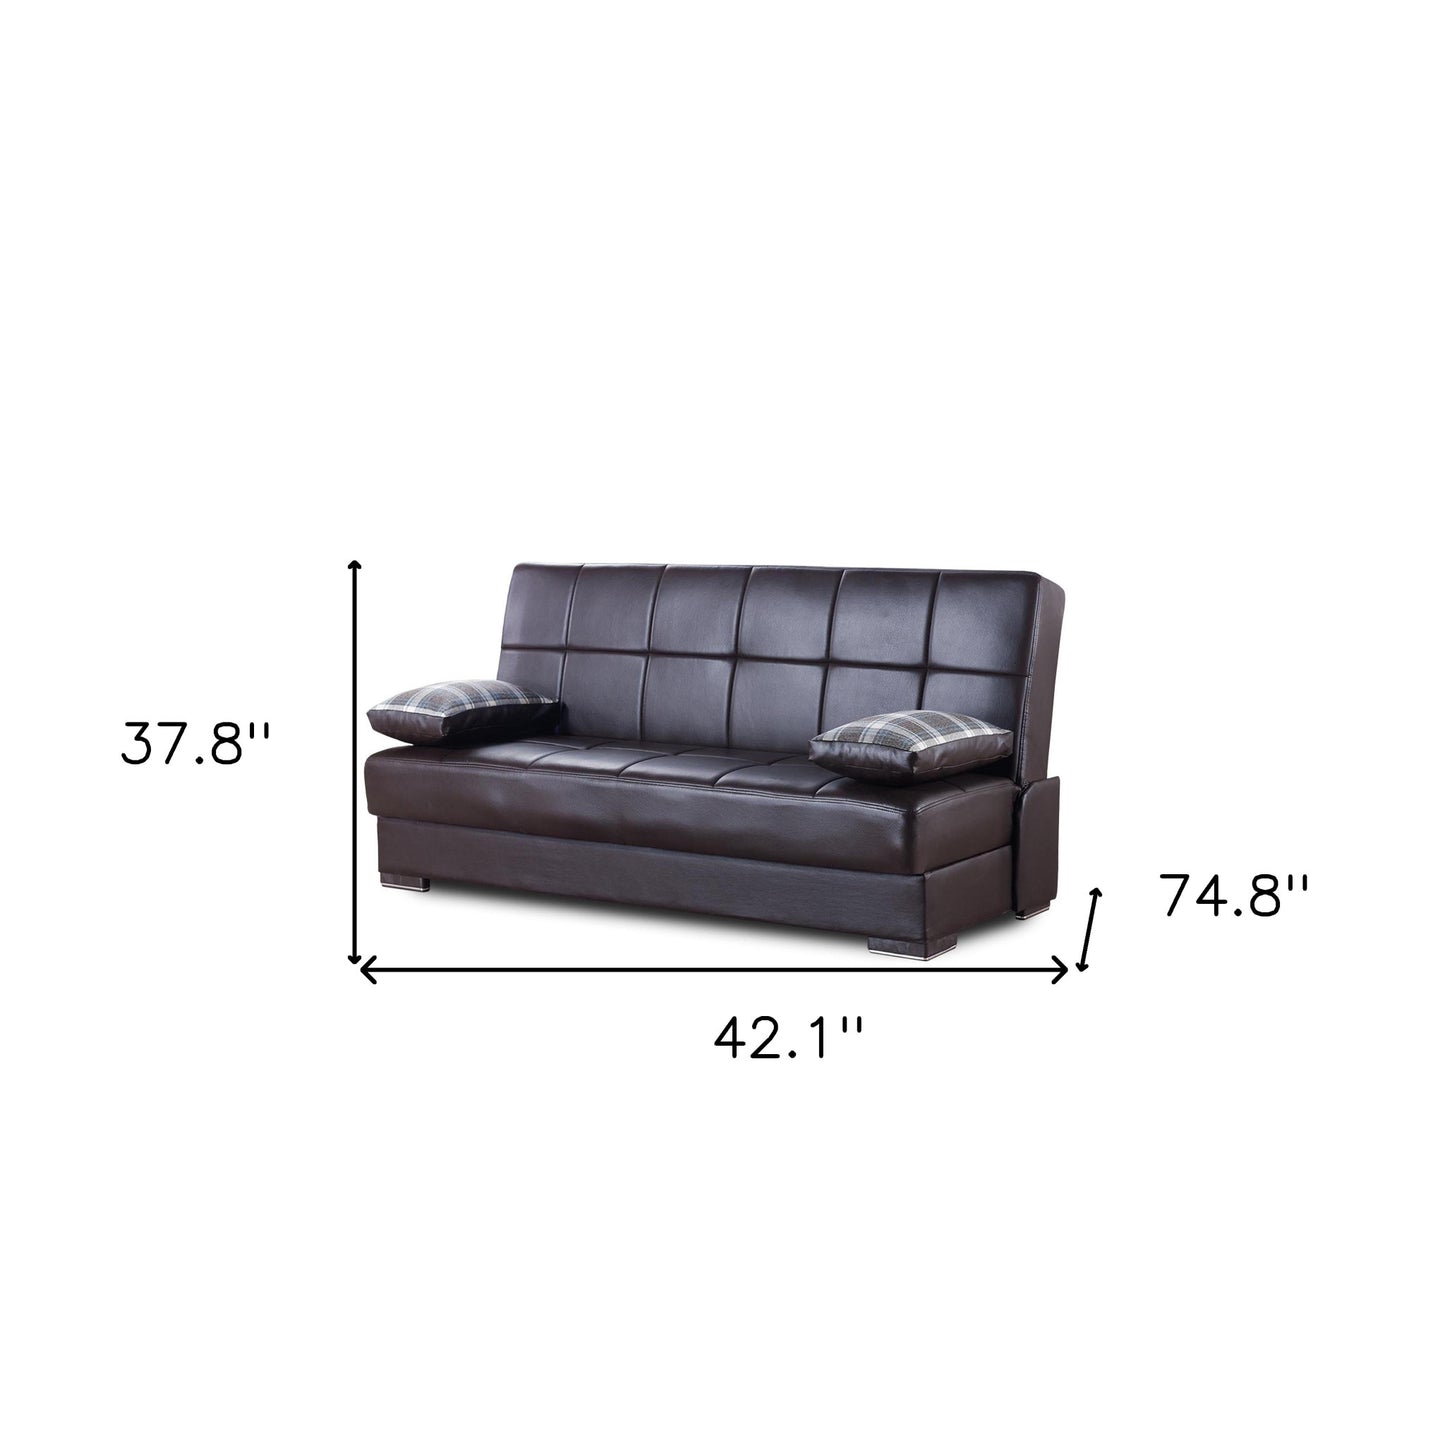 42" Brown Faux Leather And Brown Convertible Futon Sleeper Sofa With Toss Pillows